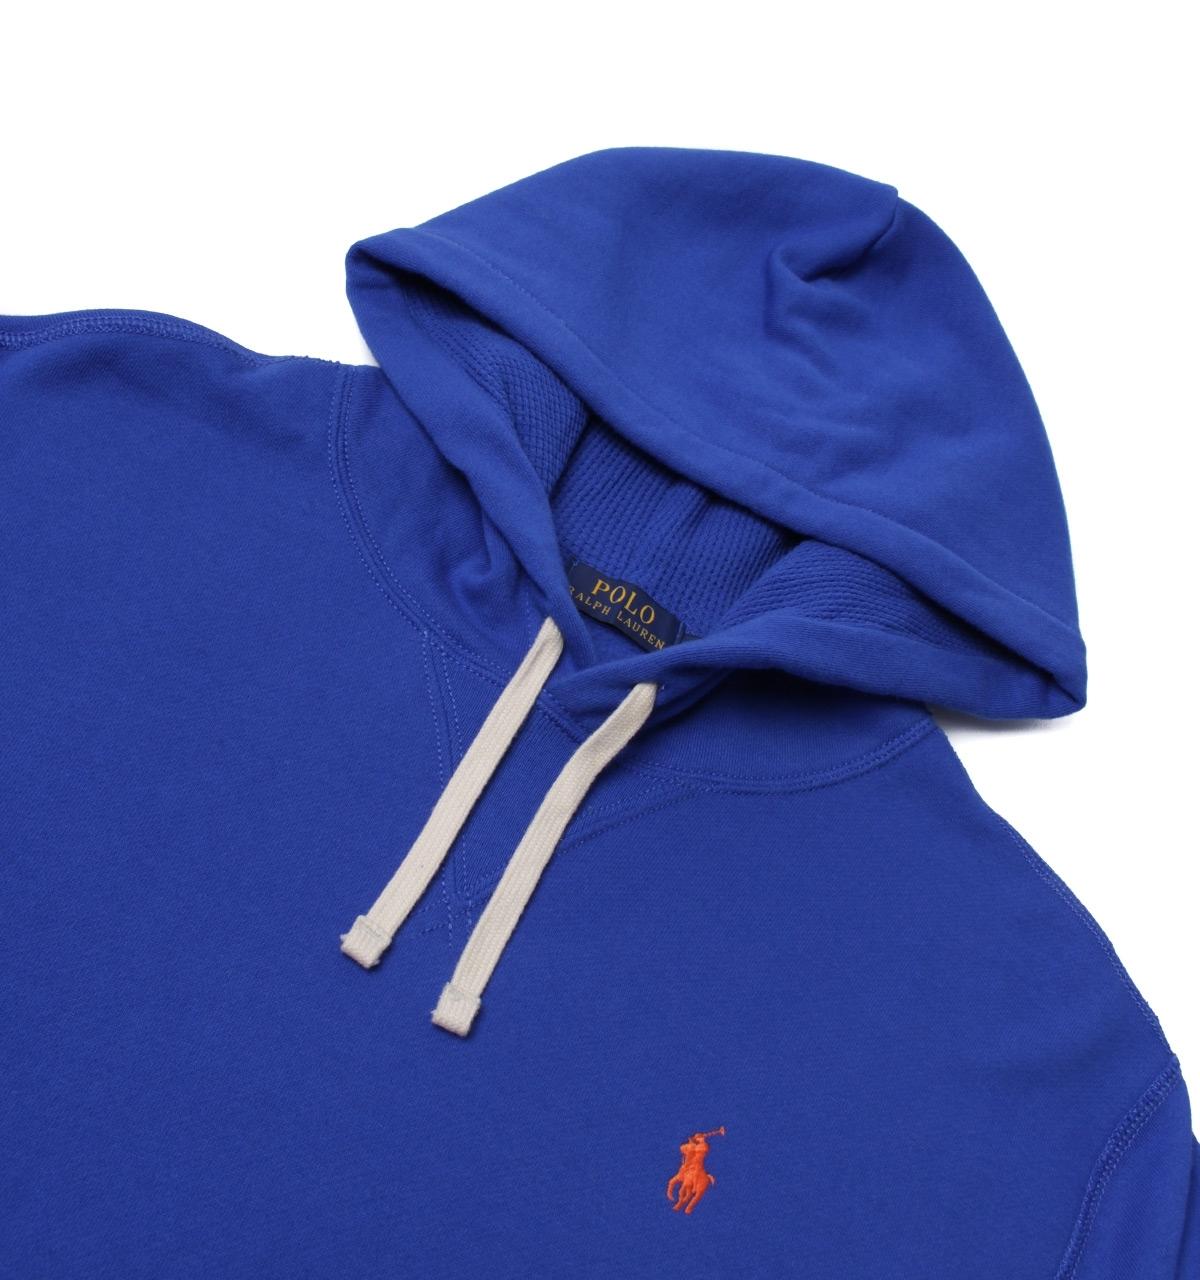 Buy > black and blue polo hoodie > in stock